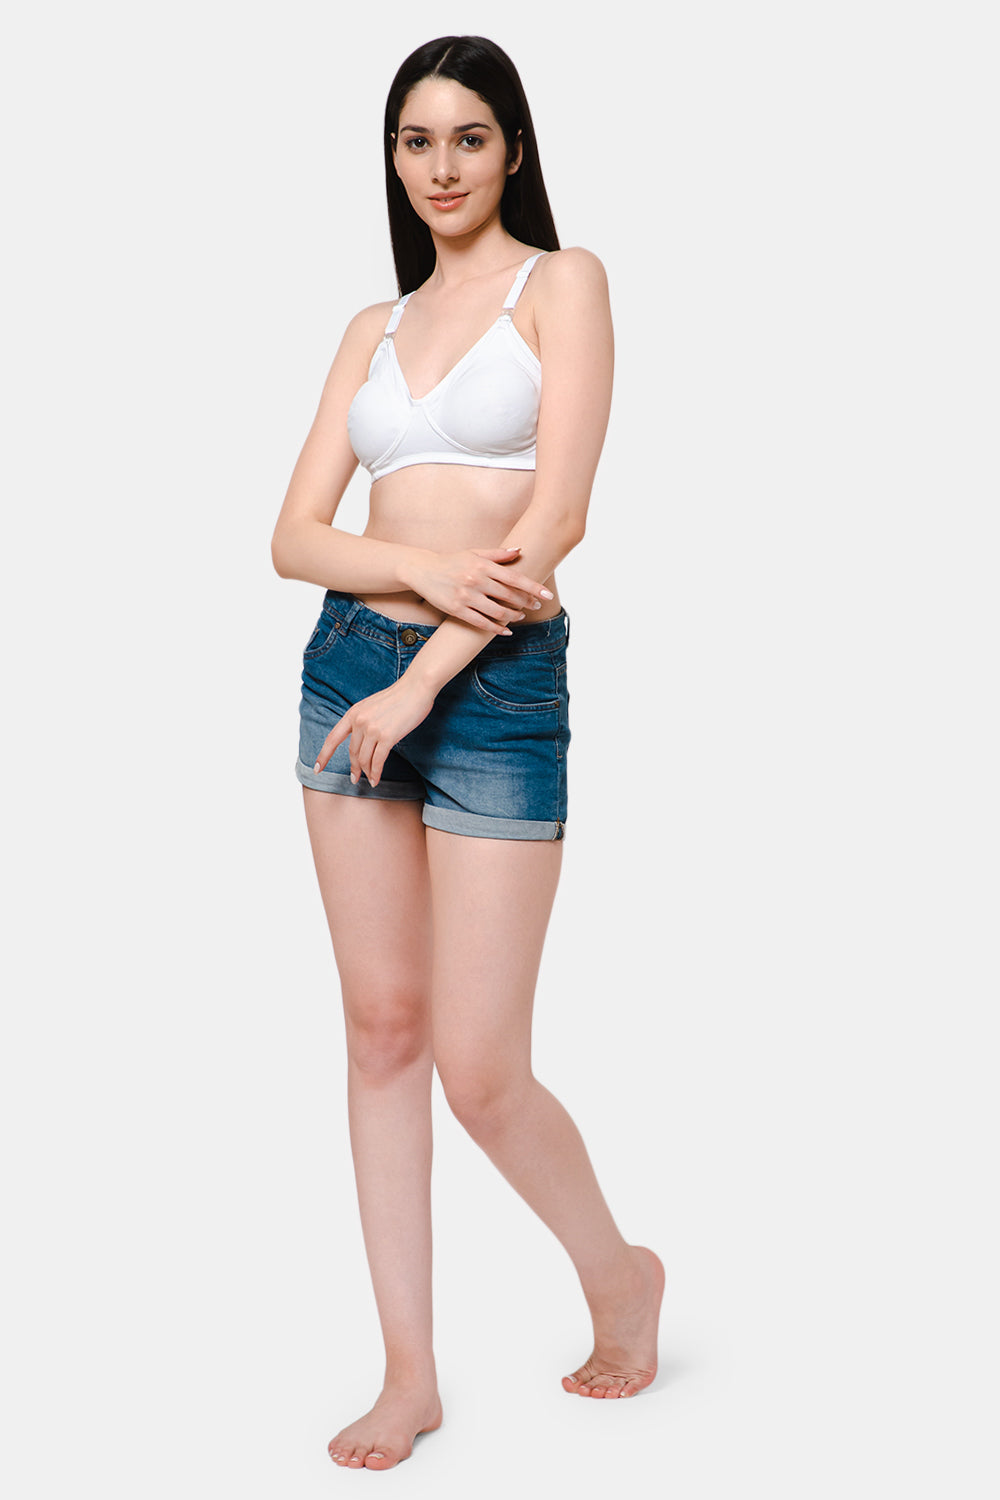 INT-FB909 Bra at best price in Chennai by Naidu Hall The Family